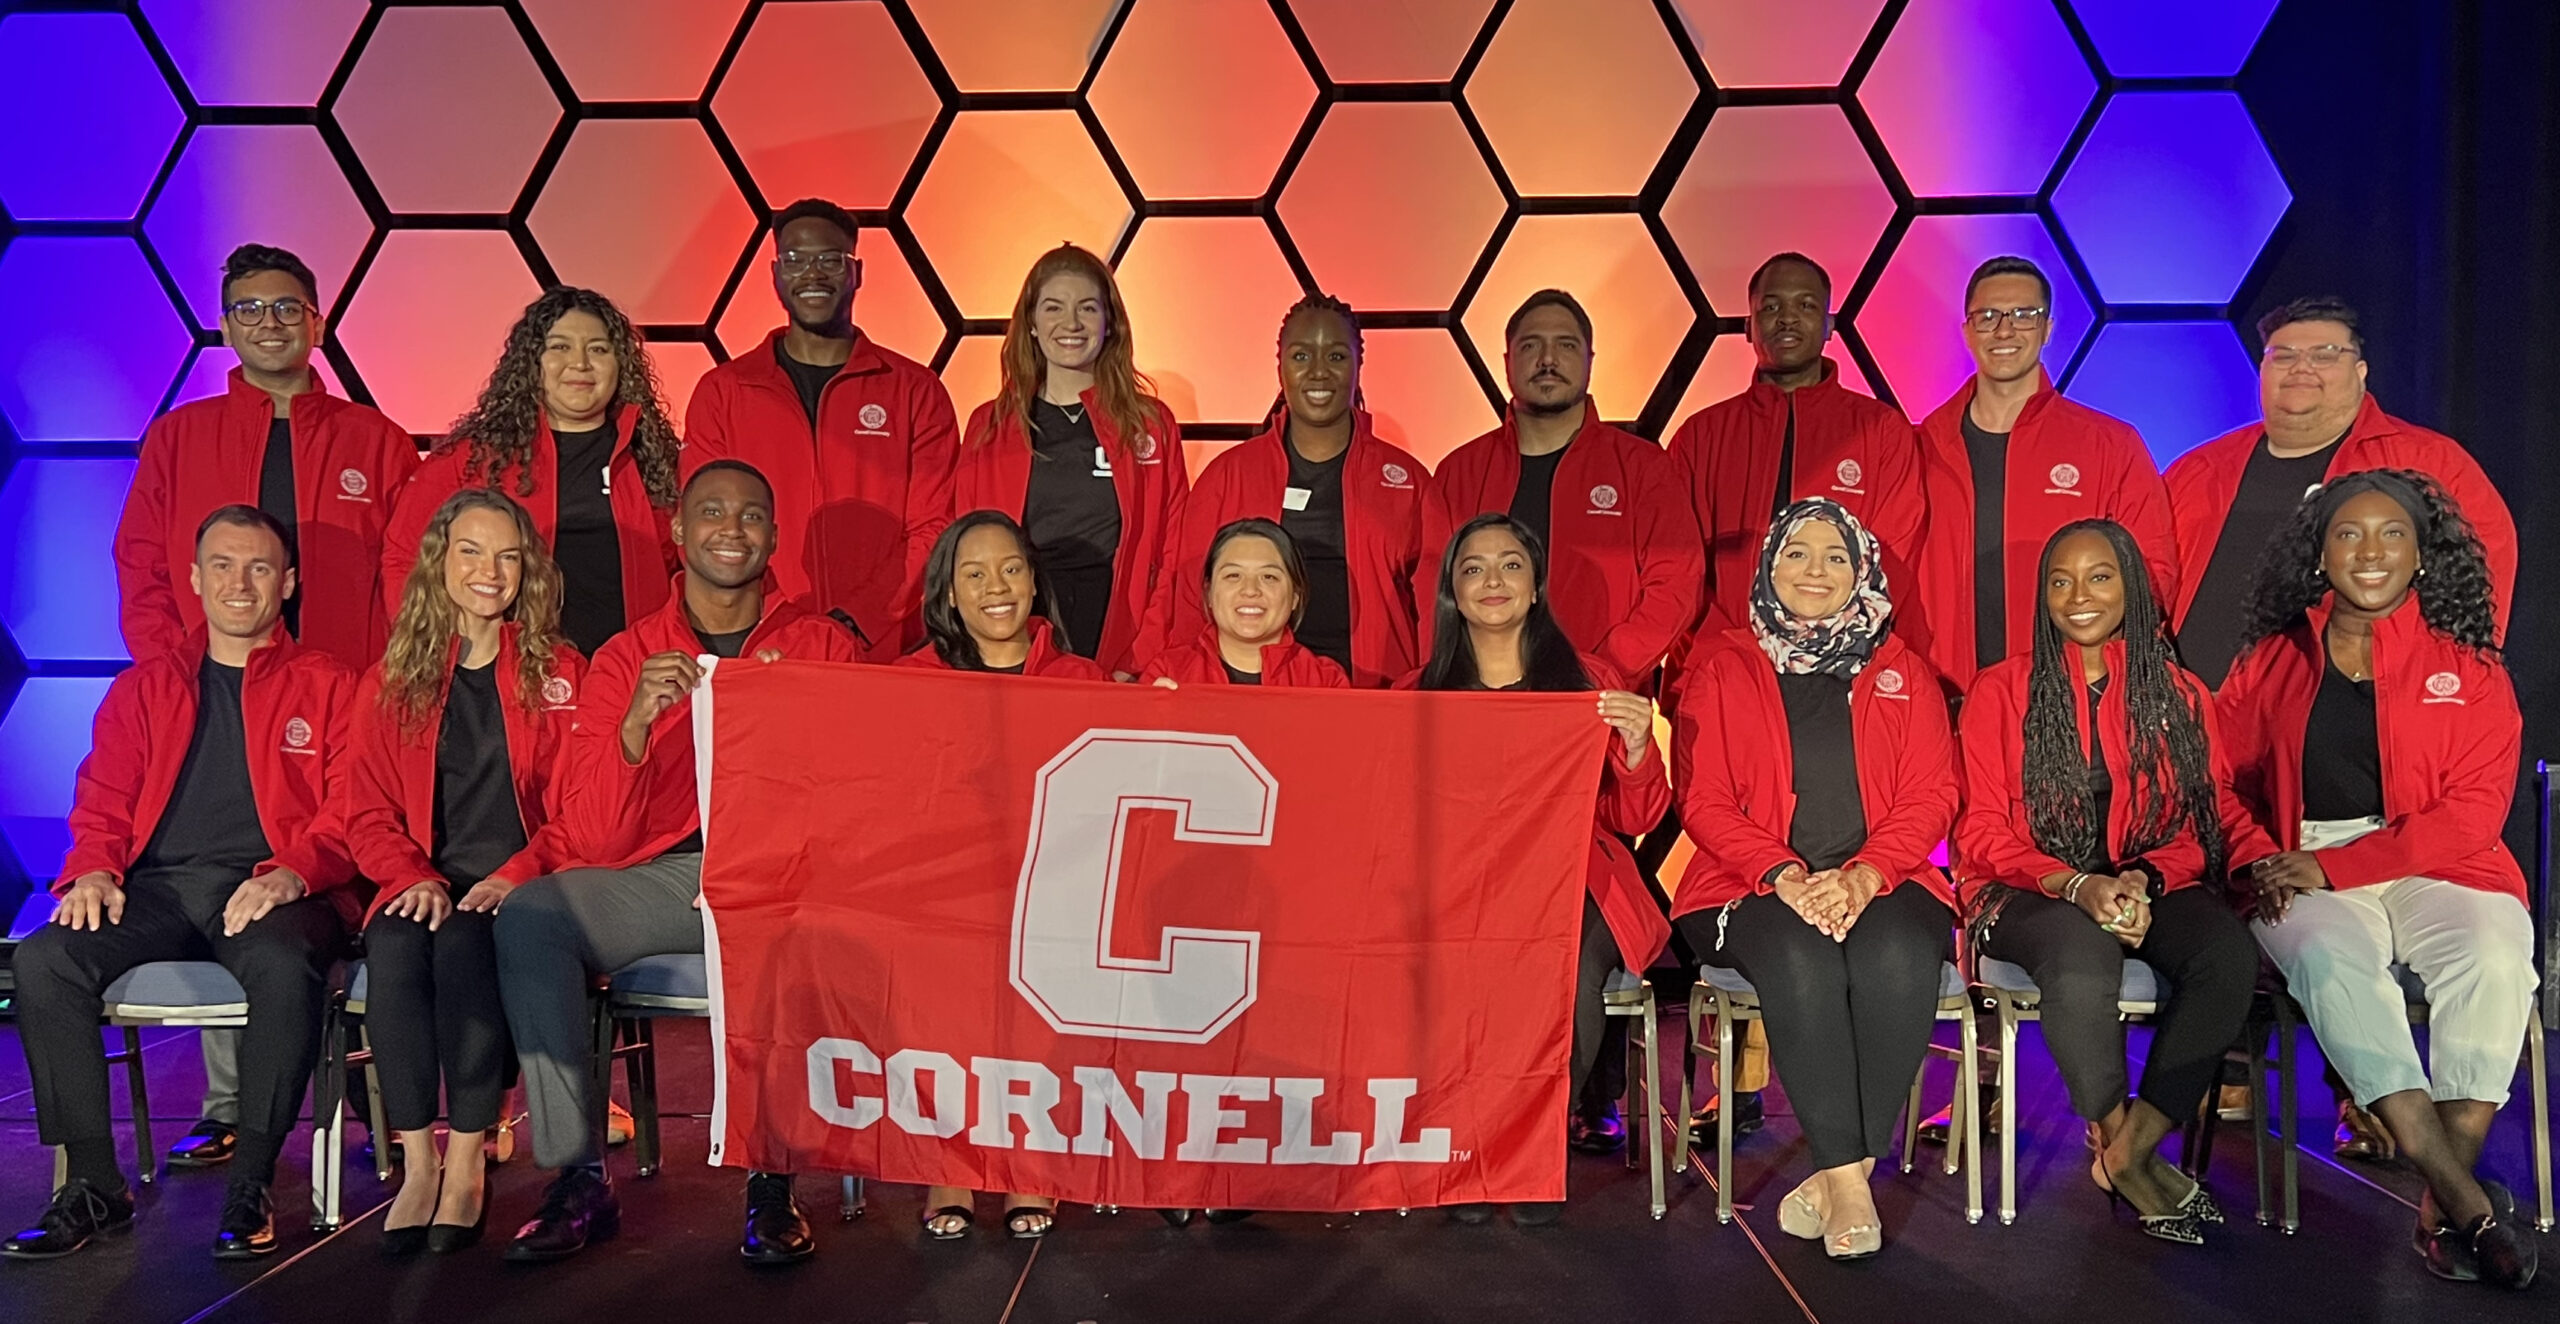 Group of people in read jackets holding a Cornell flag